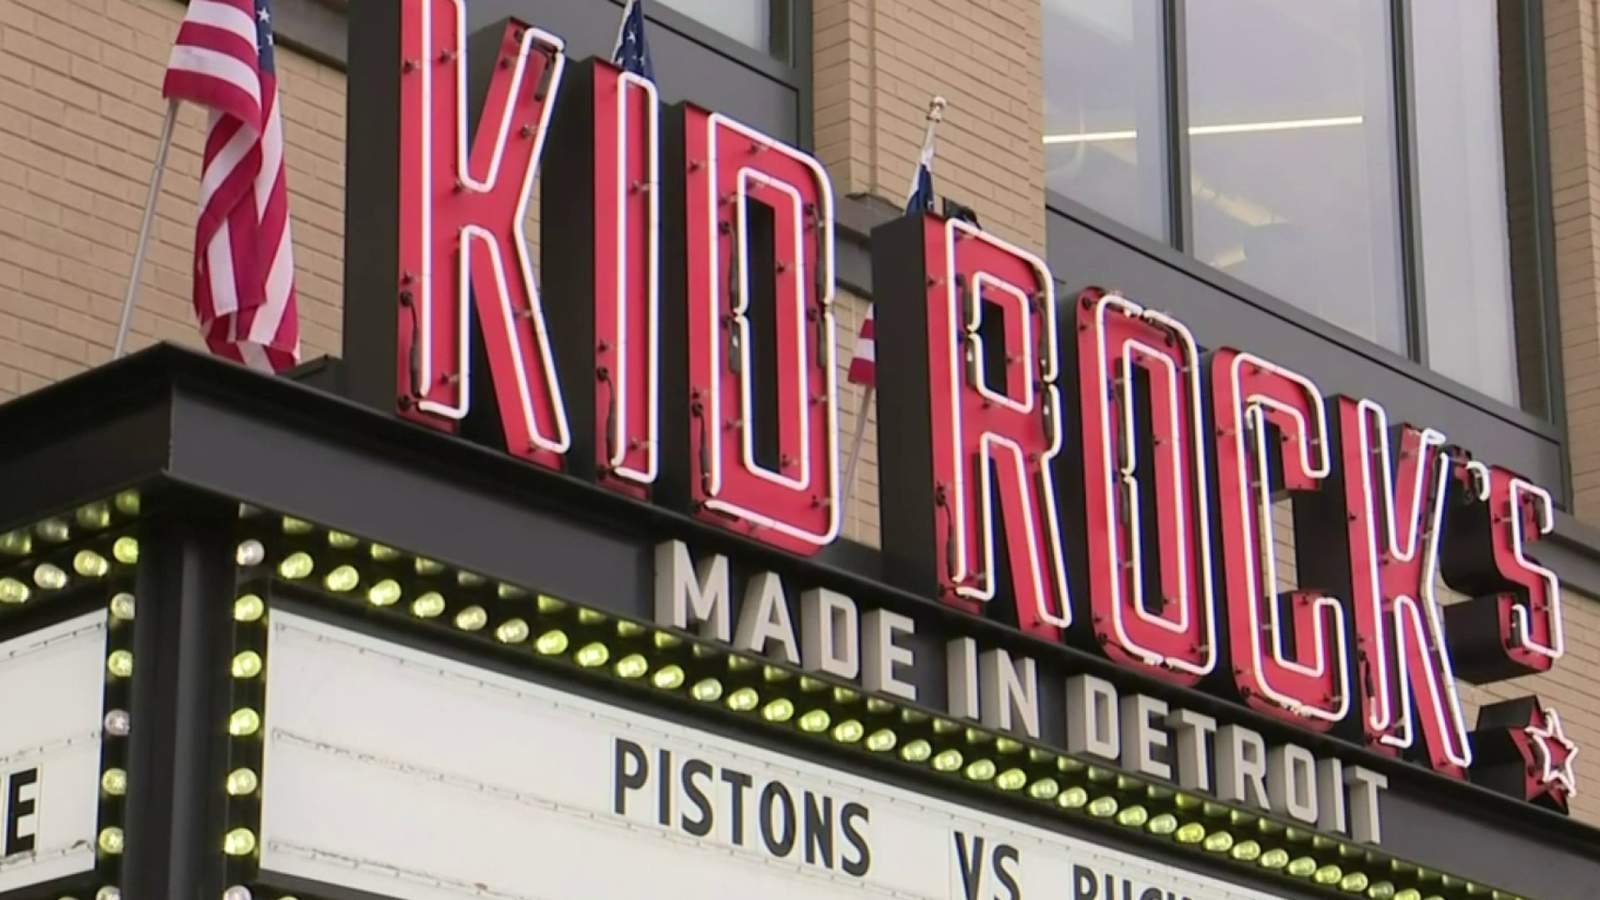 Kid Rock lists money he has donated to city after Made in Detroit restaurant closure announcement